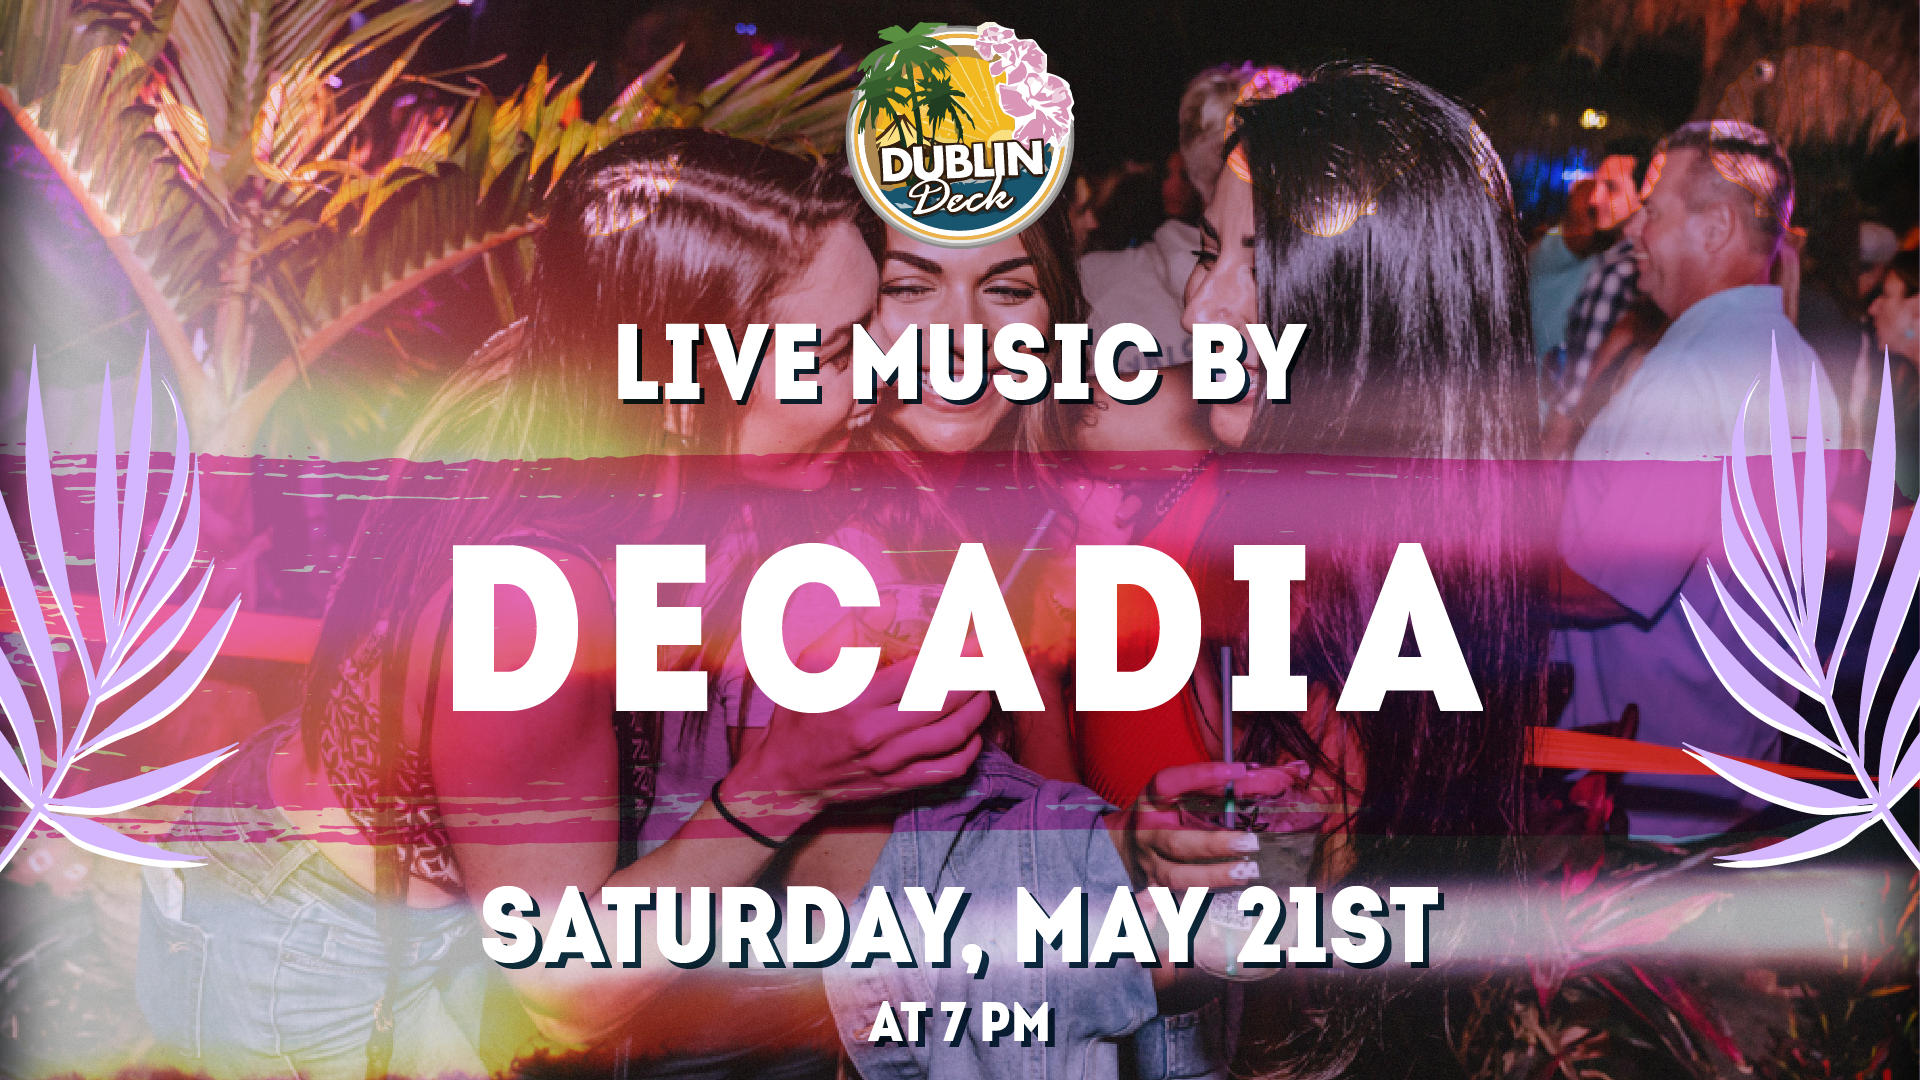 Spend your Saturday enjoying the sounds of Decadia at Dublin Deck! Music begins at 7PM